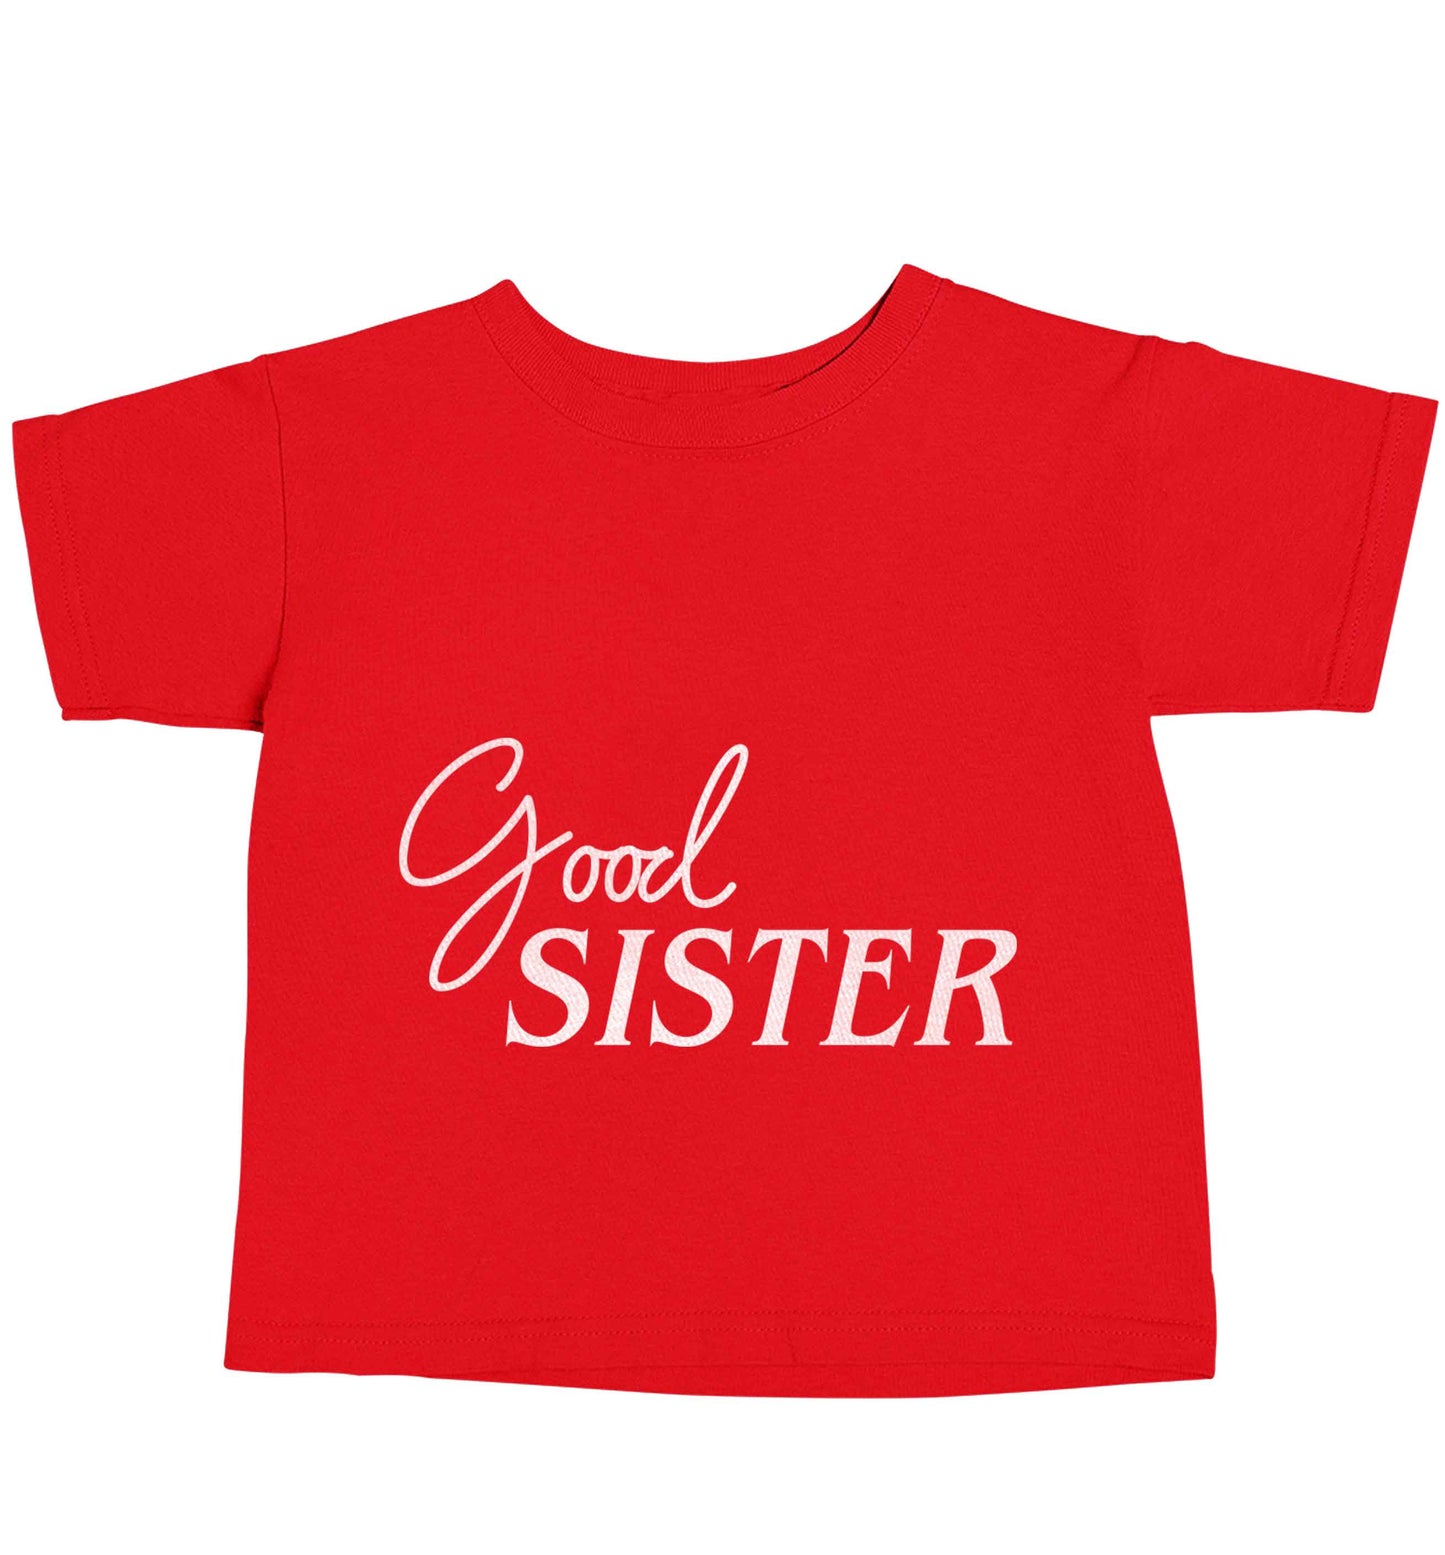 Good sister red baby toddler Tshirt 2 Years